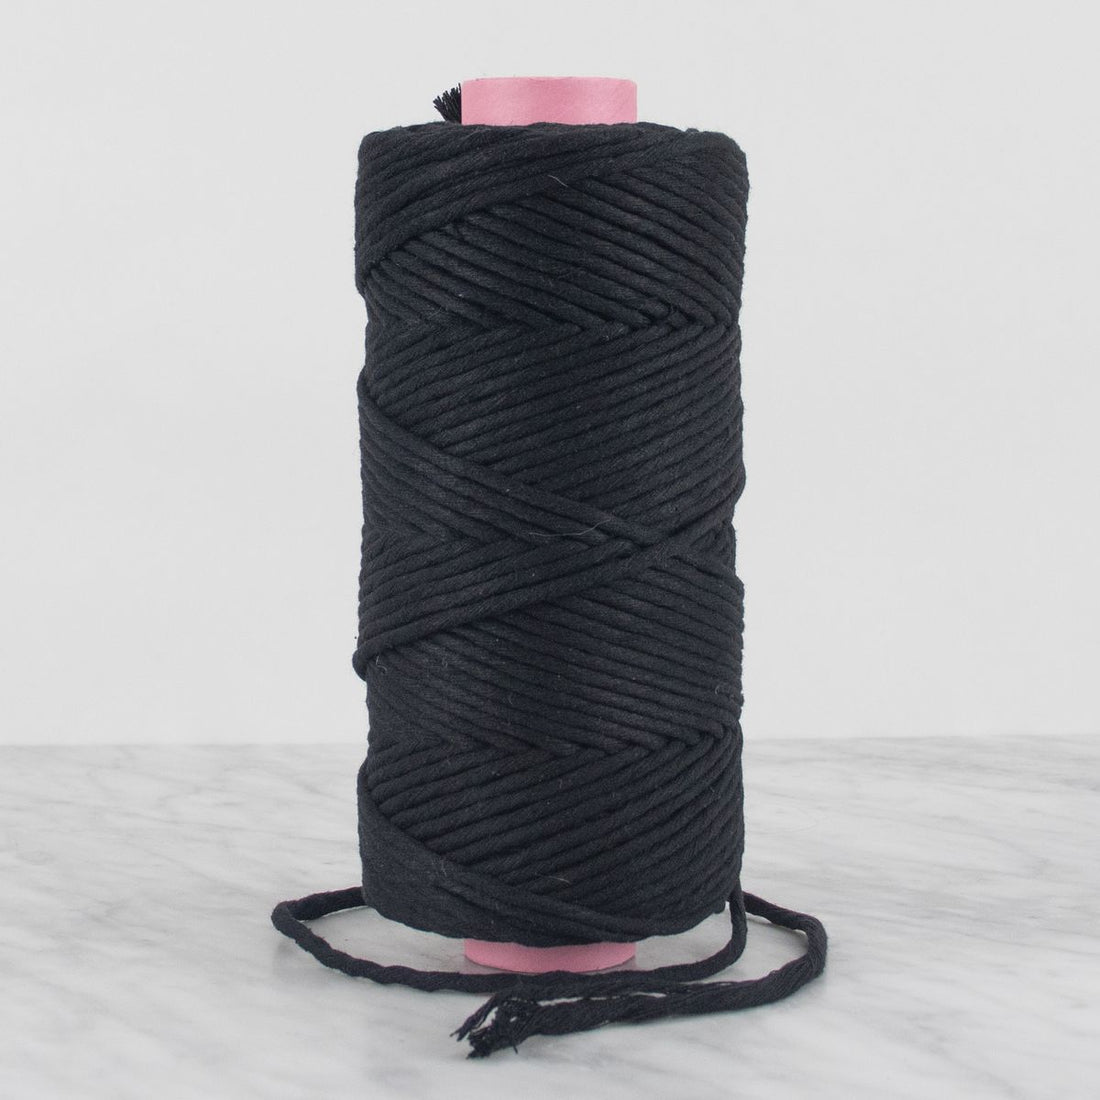 5mm Recycled Cotton String 0.5 kg - Black